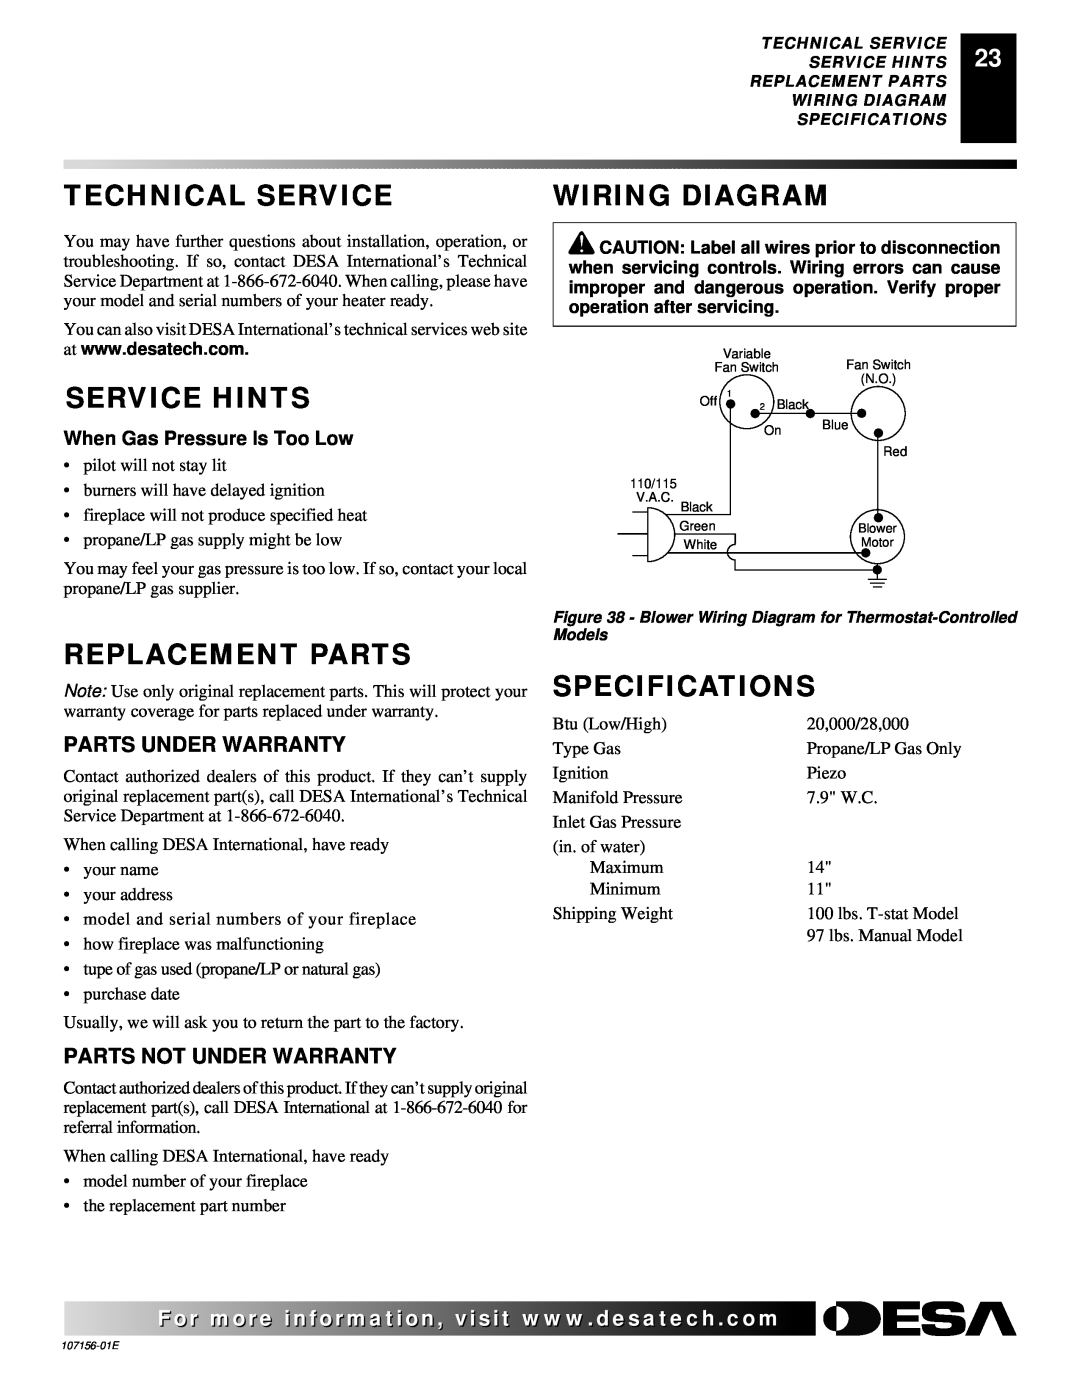 Vanguard Heating 107156-01E.pdf Technical Service, Wiring Diagram, Service Hints, Replacement Parts, Specifications 